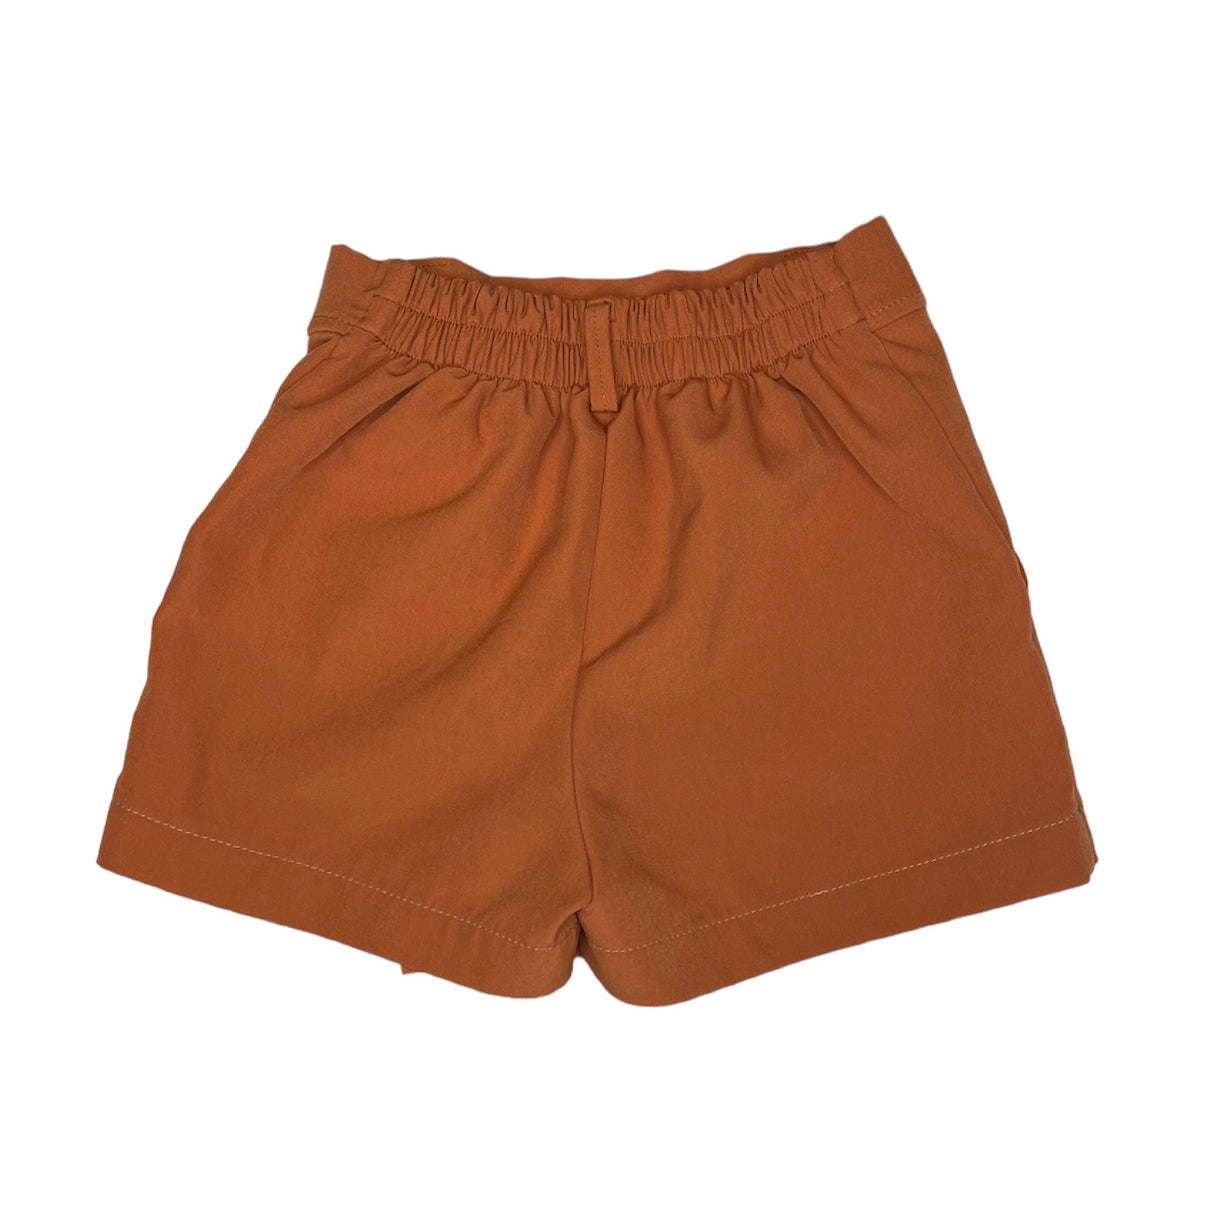 A Second Chance - Short Skirt 9Y Orange Kids - Delivery All Overr Lebanon